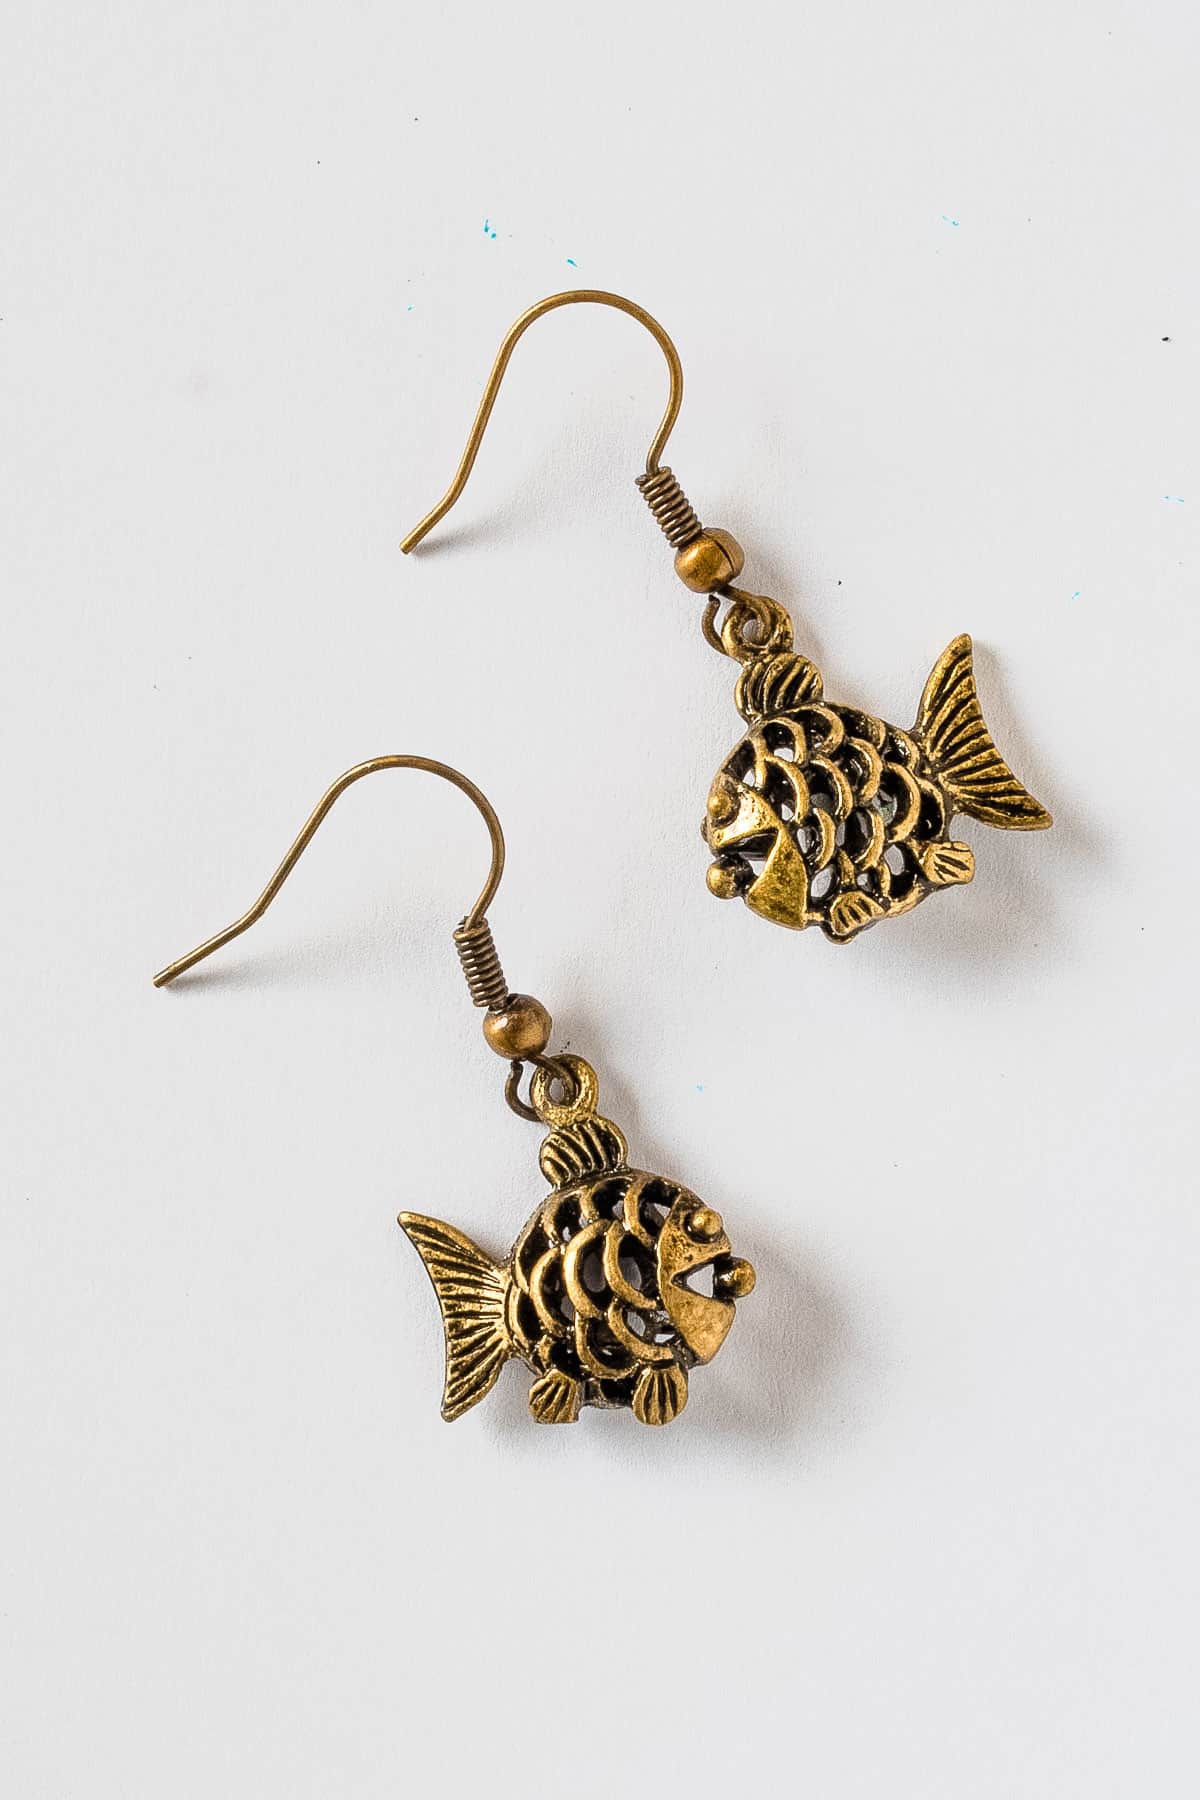 Earring making for beginners - A pair of fish earrings.